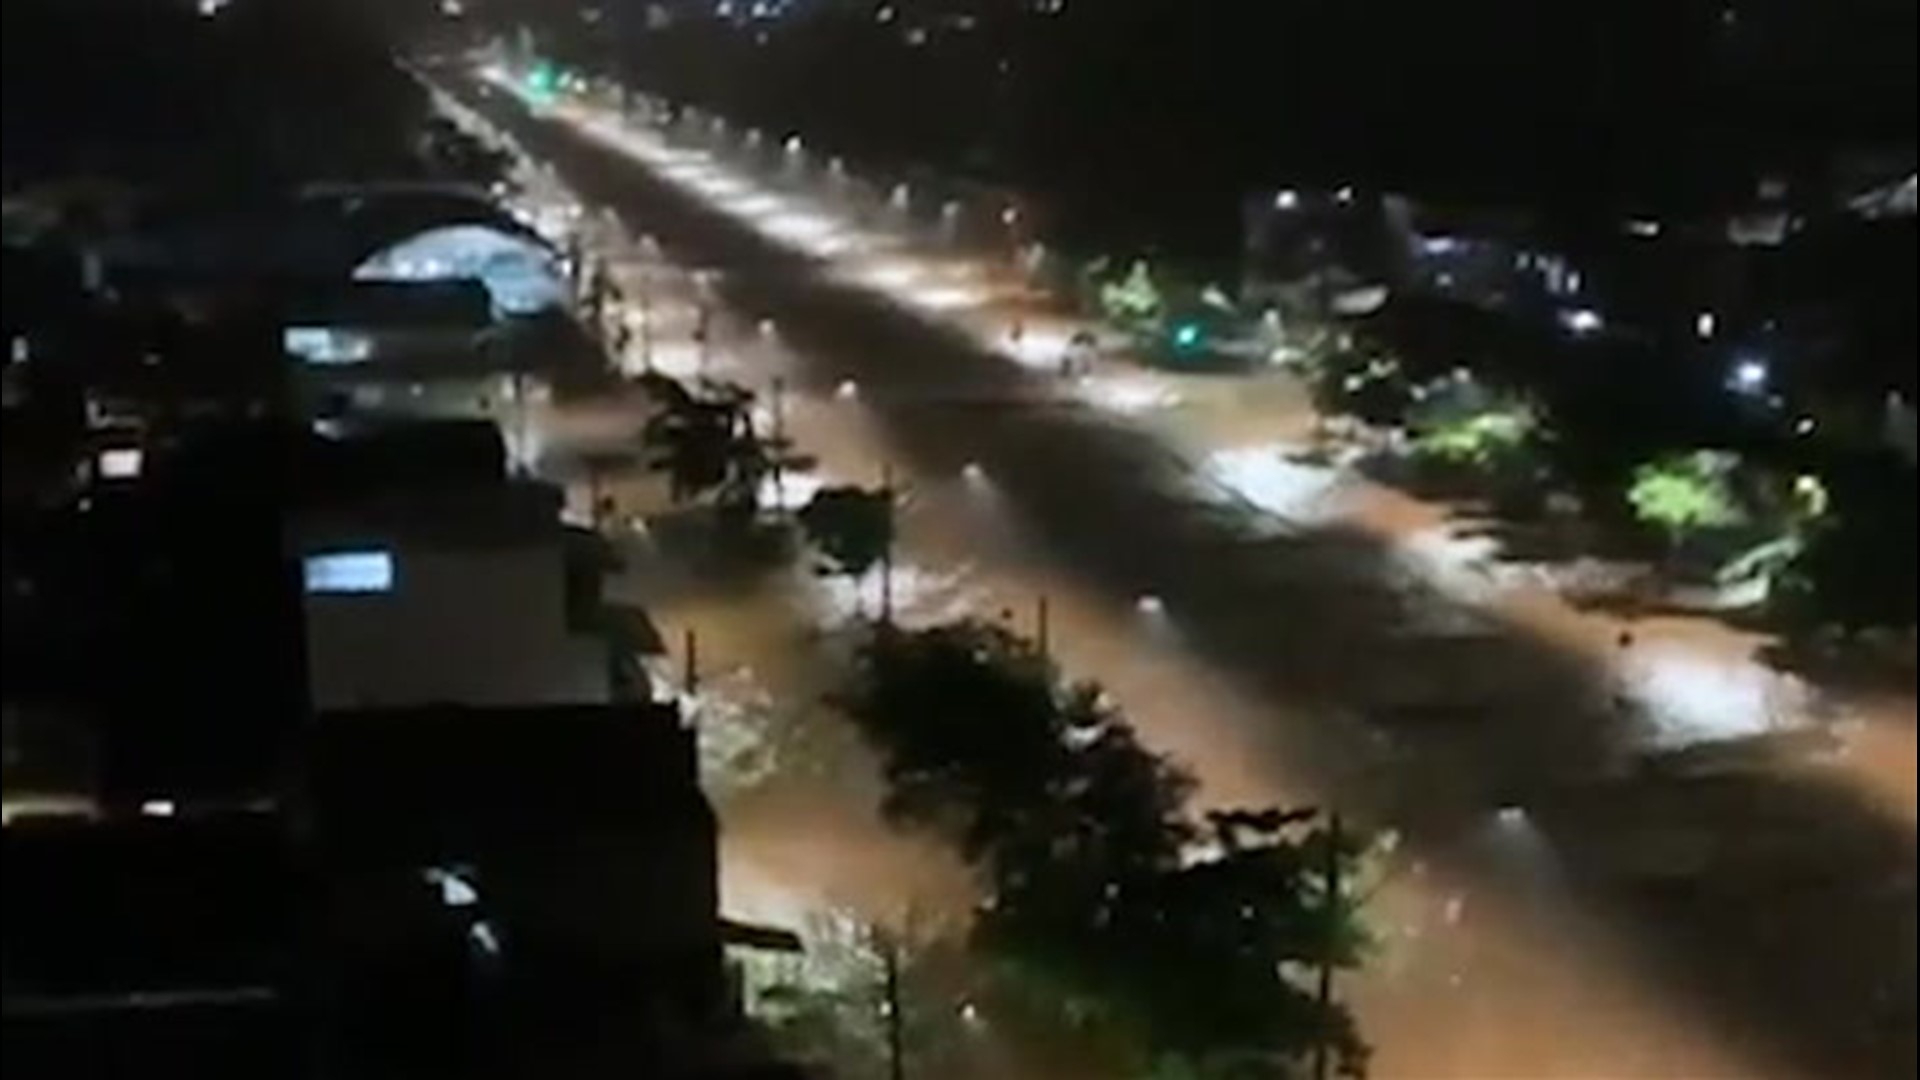 Heavy, persistent rain in Brazil on Jan. 25, resulted in severe flooding. The city of Belo Horizonte, Minas Gerias, was left completely inundated.